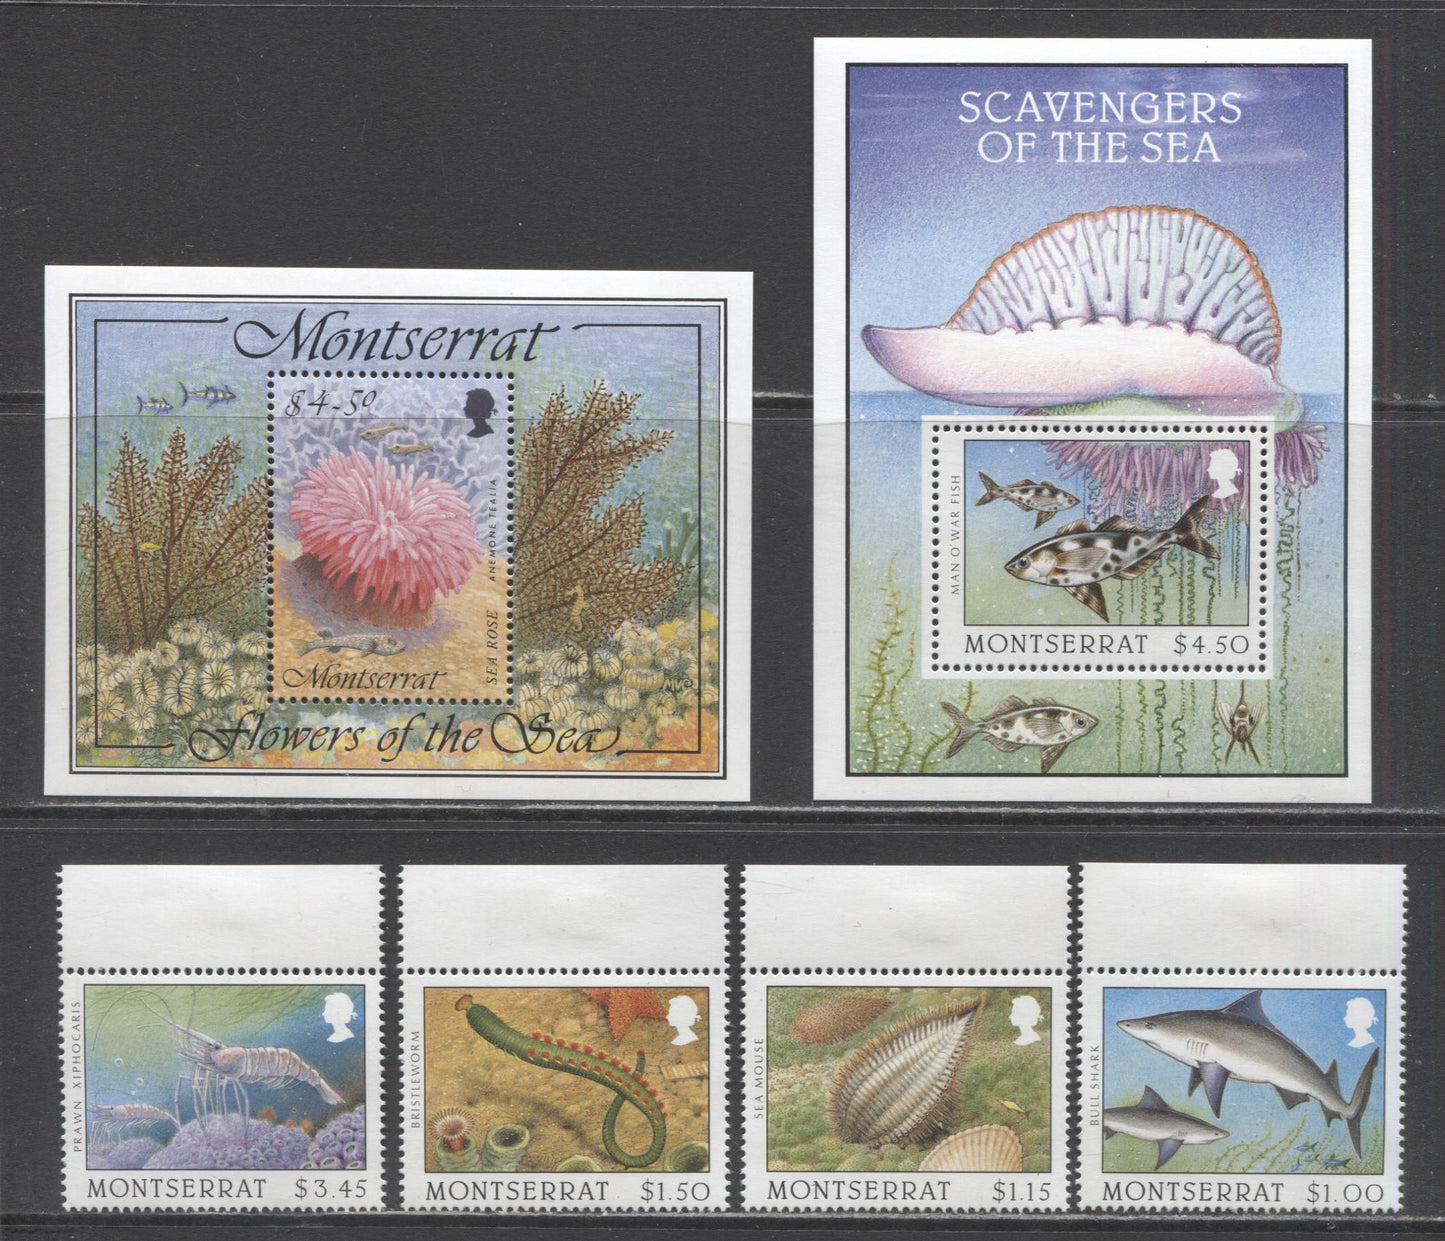 Lot 97 Montserrat SC#859/886 1995-1996 Sea Vegetation - Scavengers Of The Sea Issues, 6 VFNH & OG Singles & Souvenir Sheets, Click on Listing to See ALL Pictures, 2017 Scott Cat. $18.85